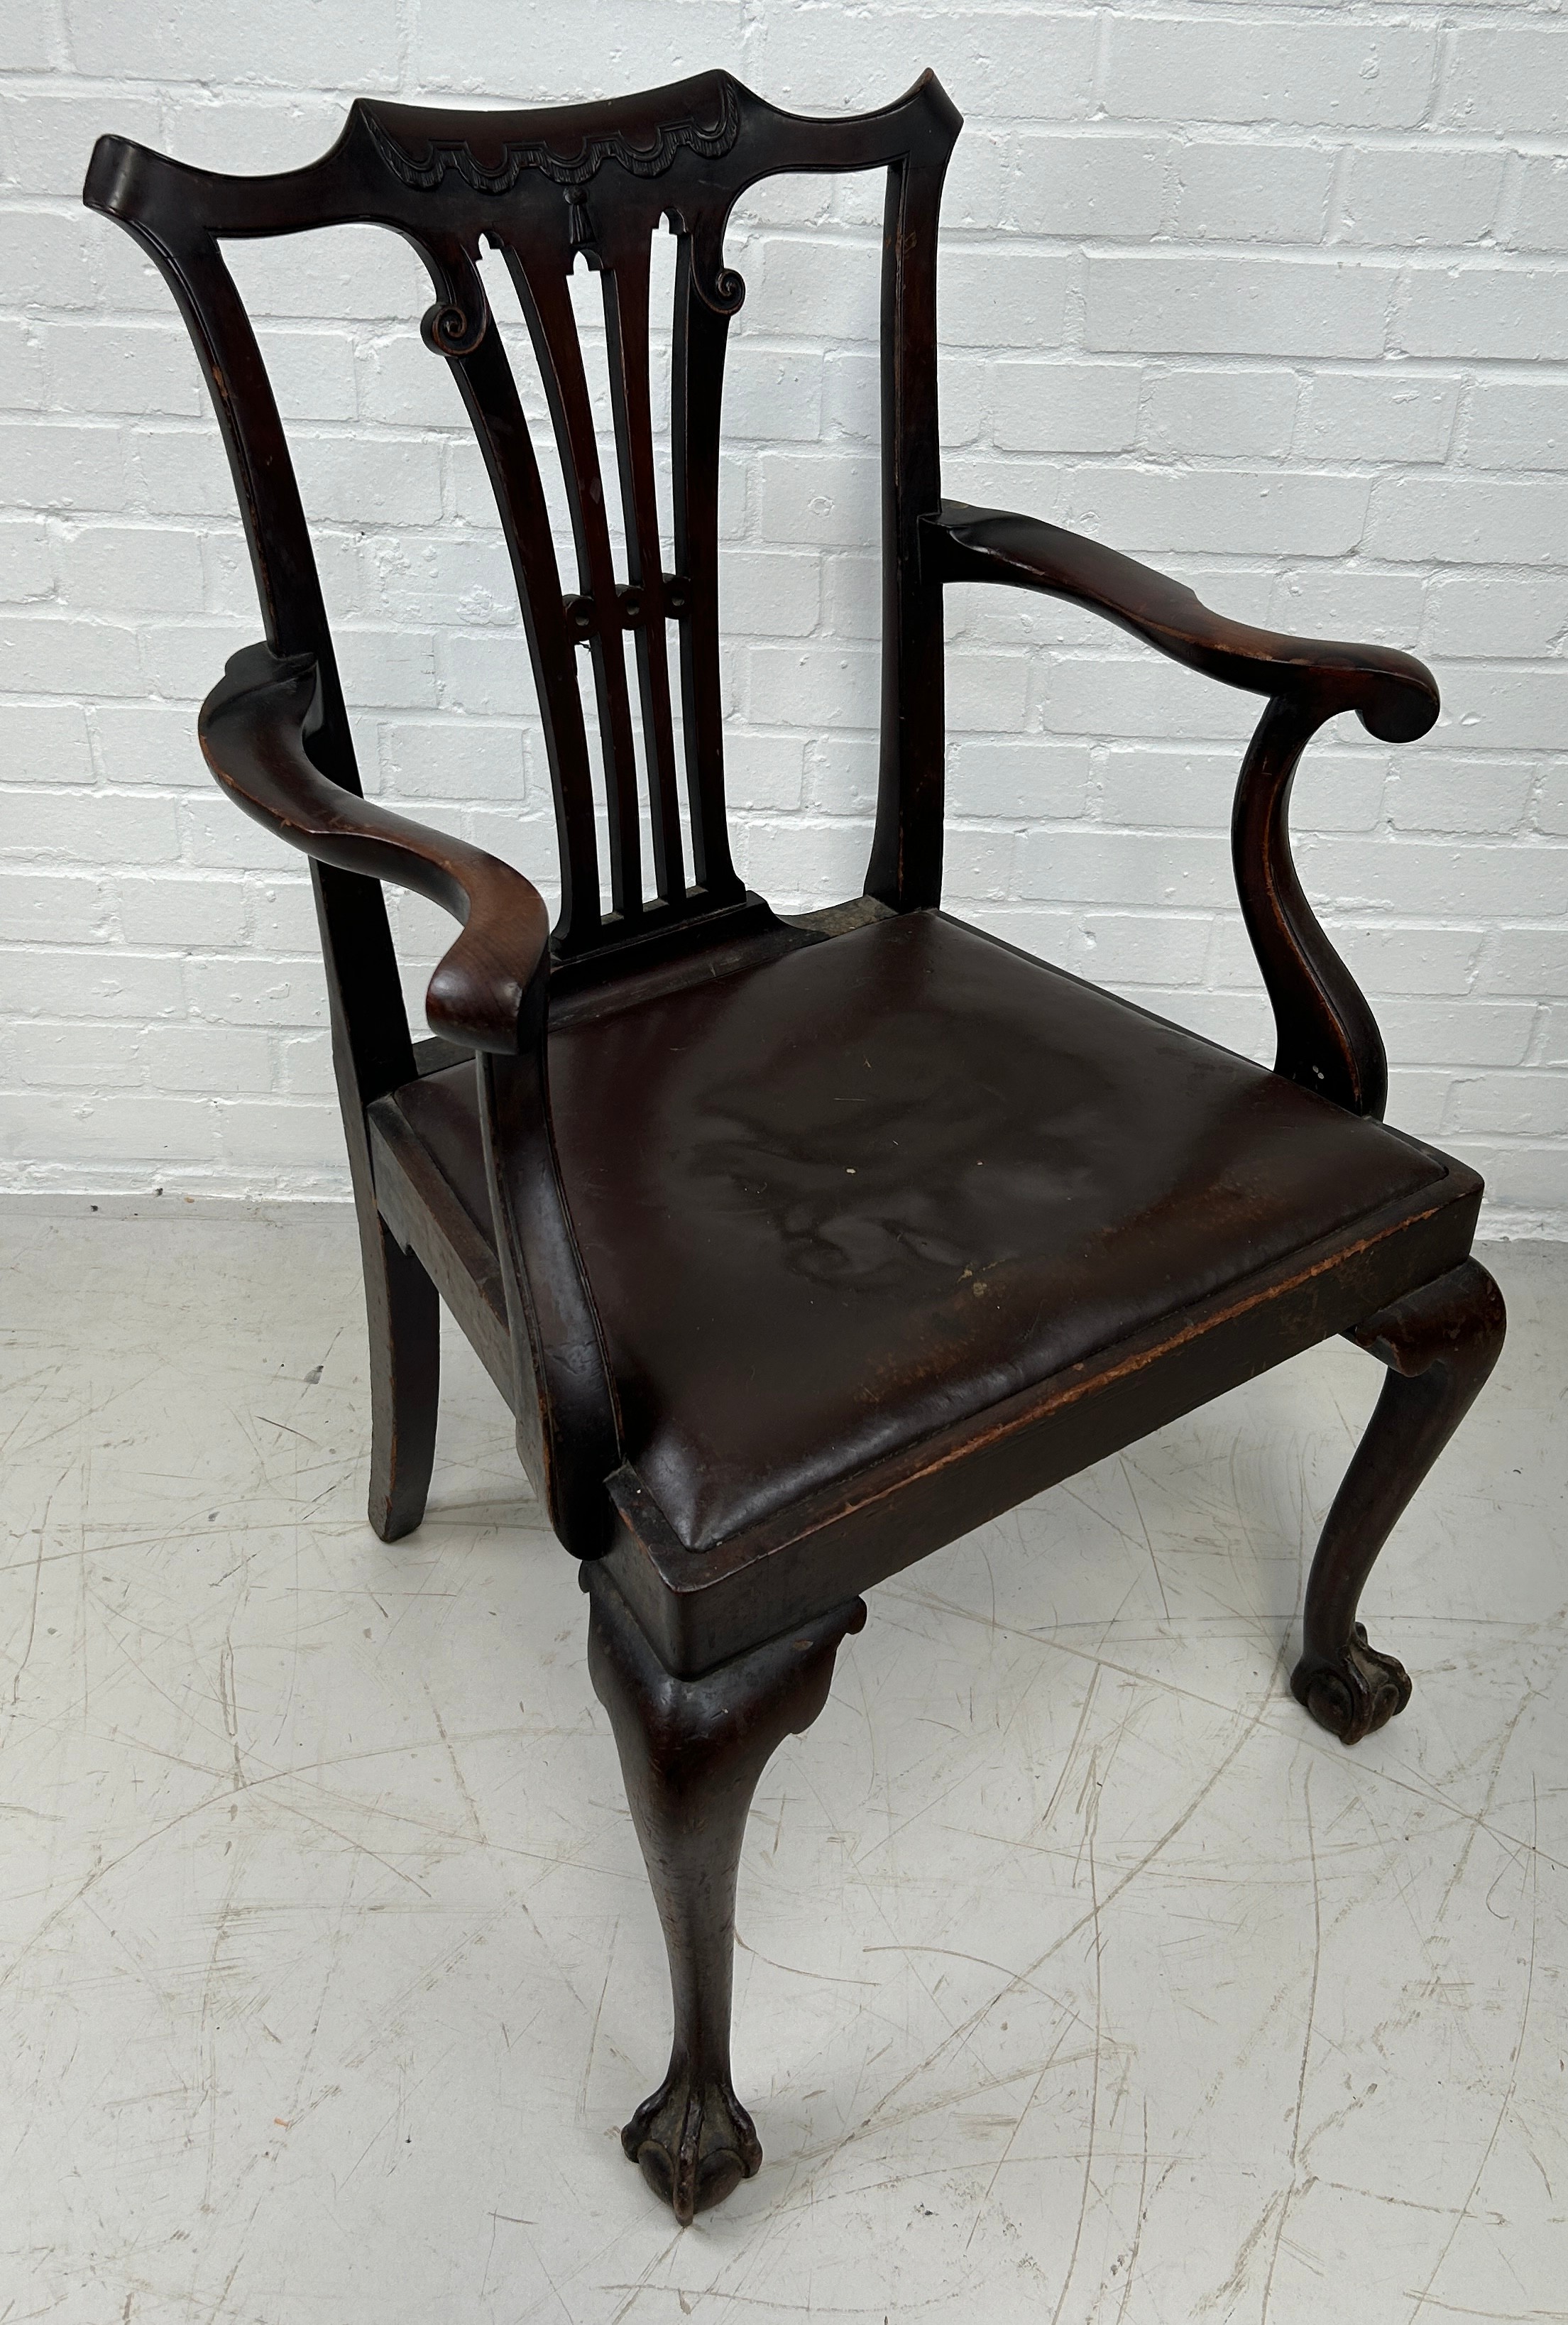 A CHIPPENDALE DESIGN DESK CHAIR WITH BROWN LEATHER SEAT AND CLAW AND BALL FEET, 96cm x 60cm x 46cm